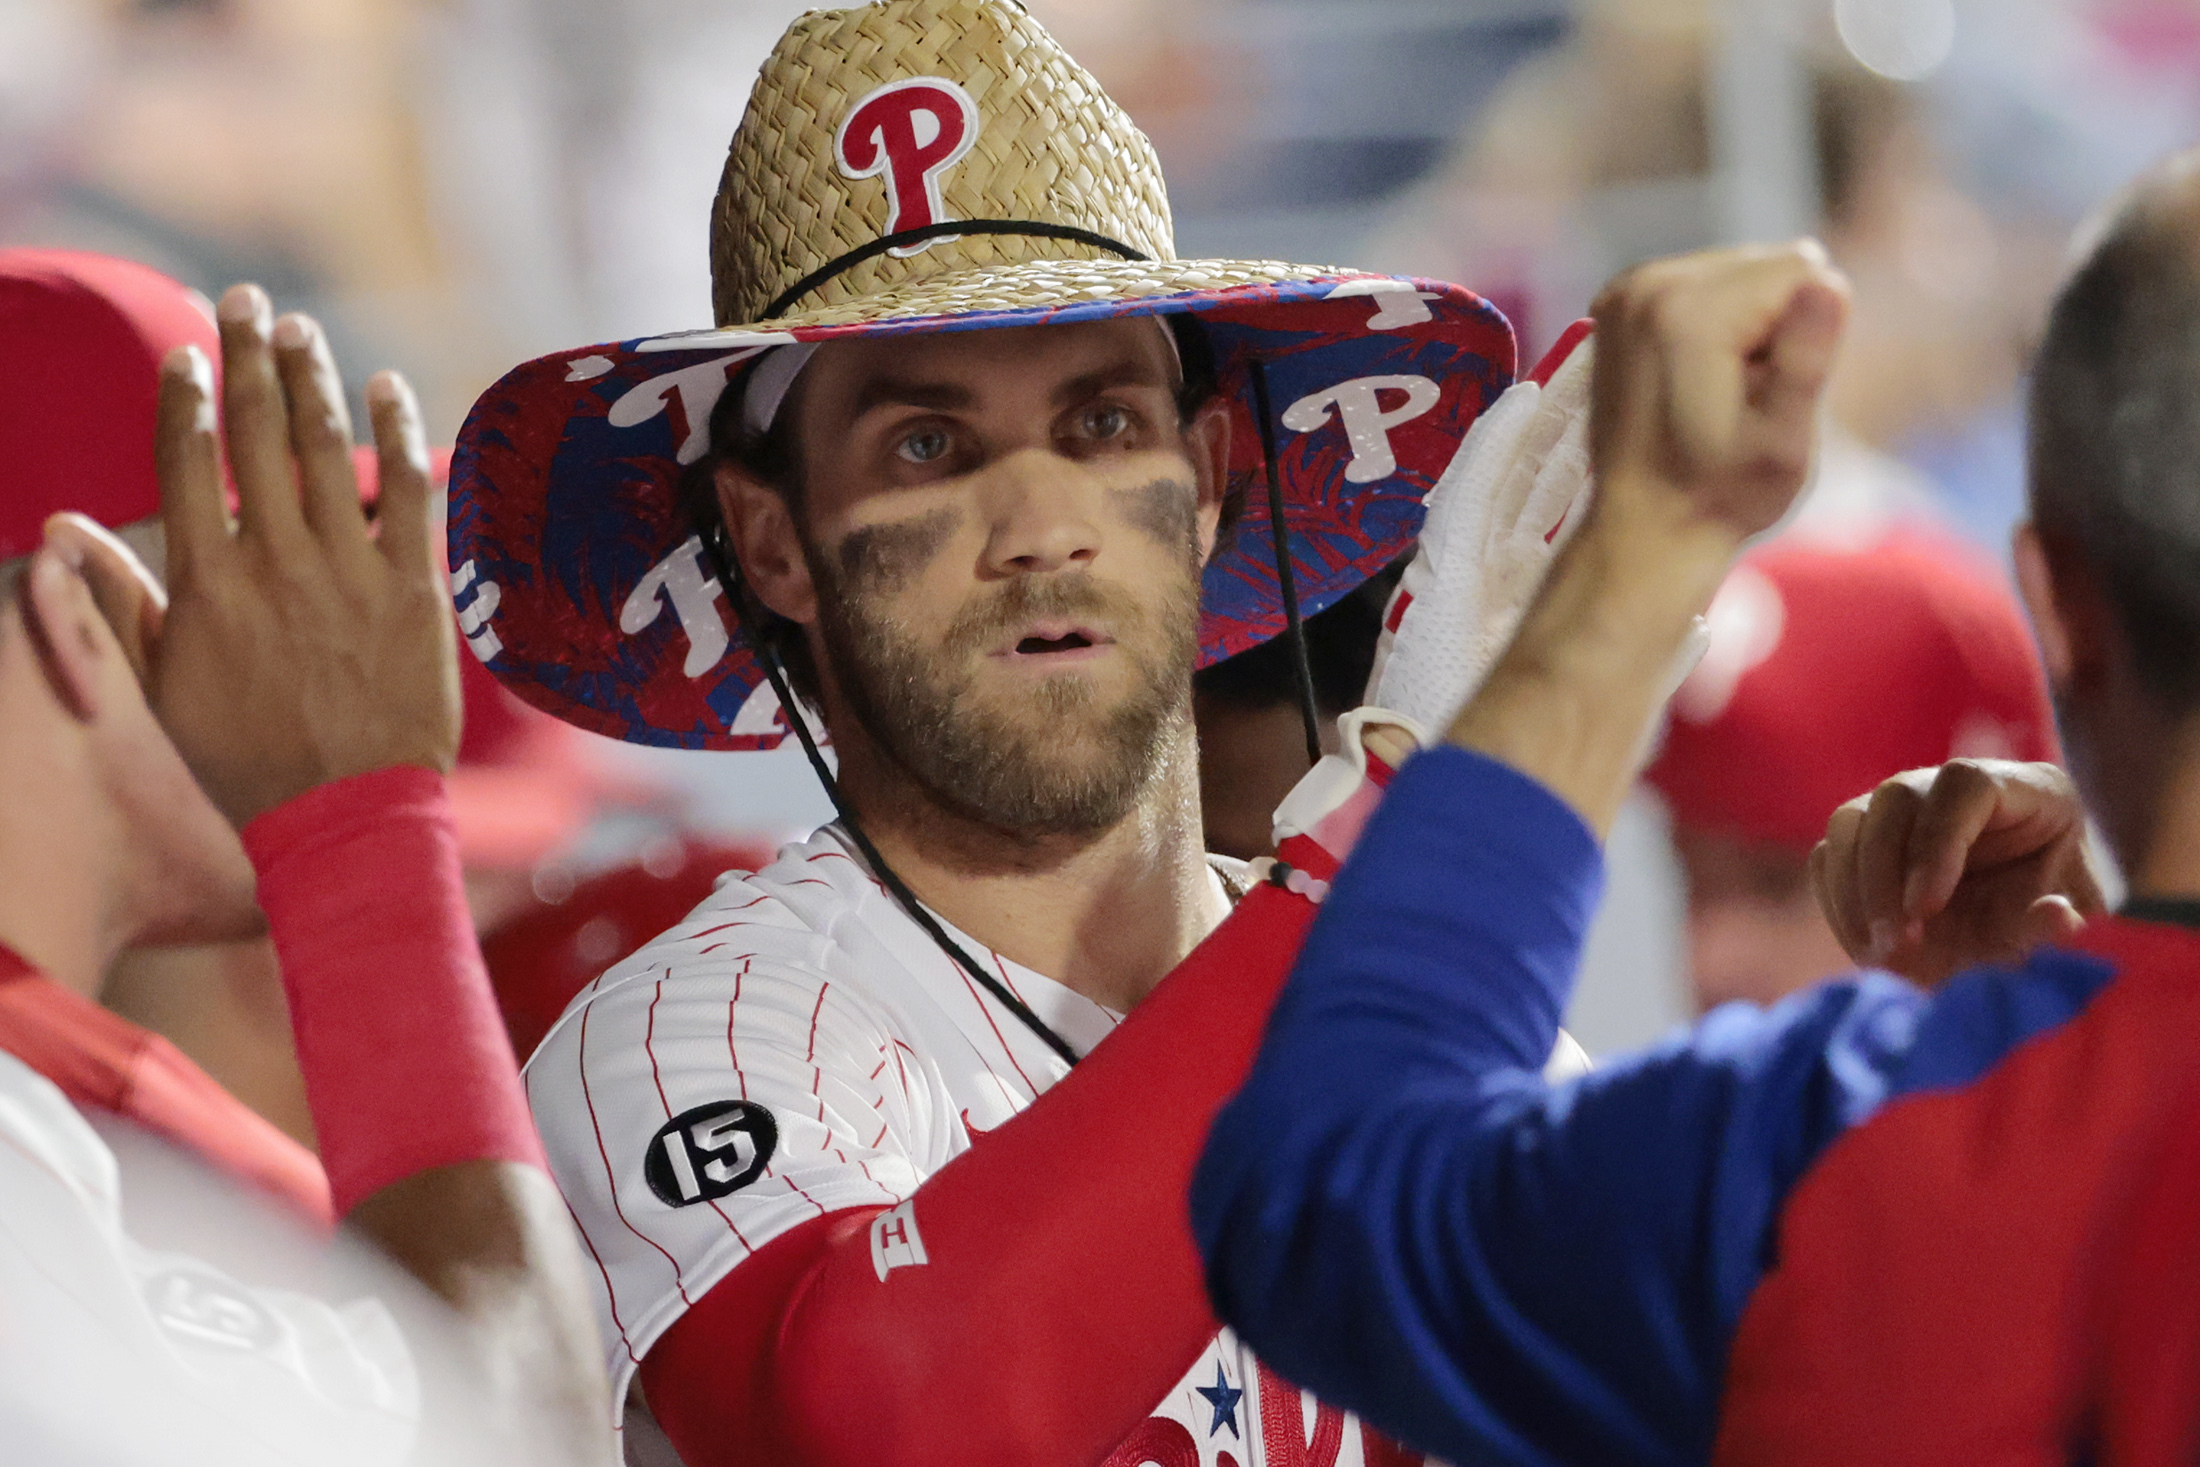 Bryce Harper makes intentions clear with galvanizing MVP speech